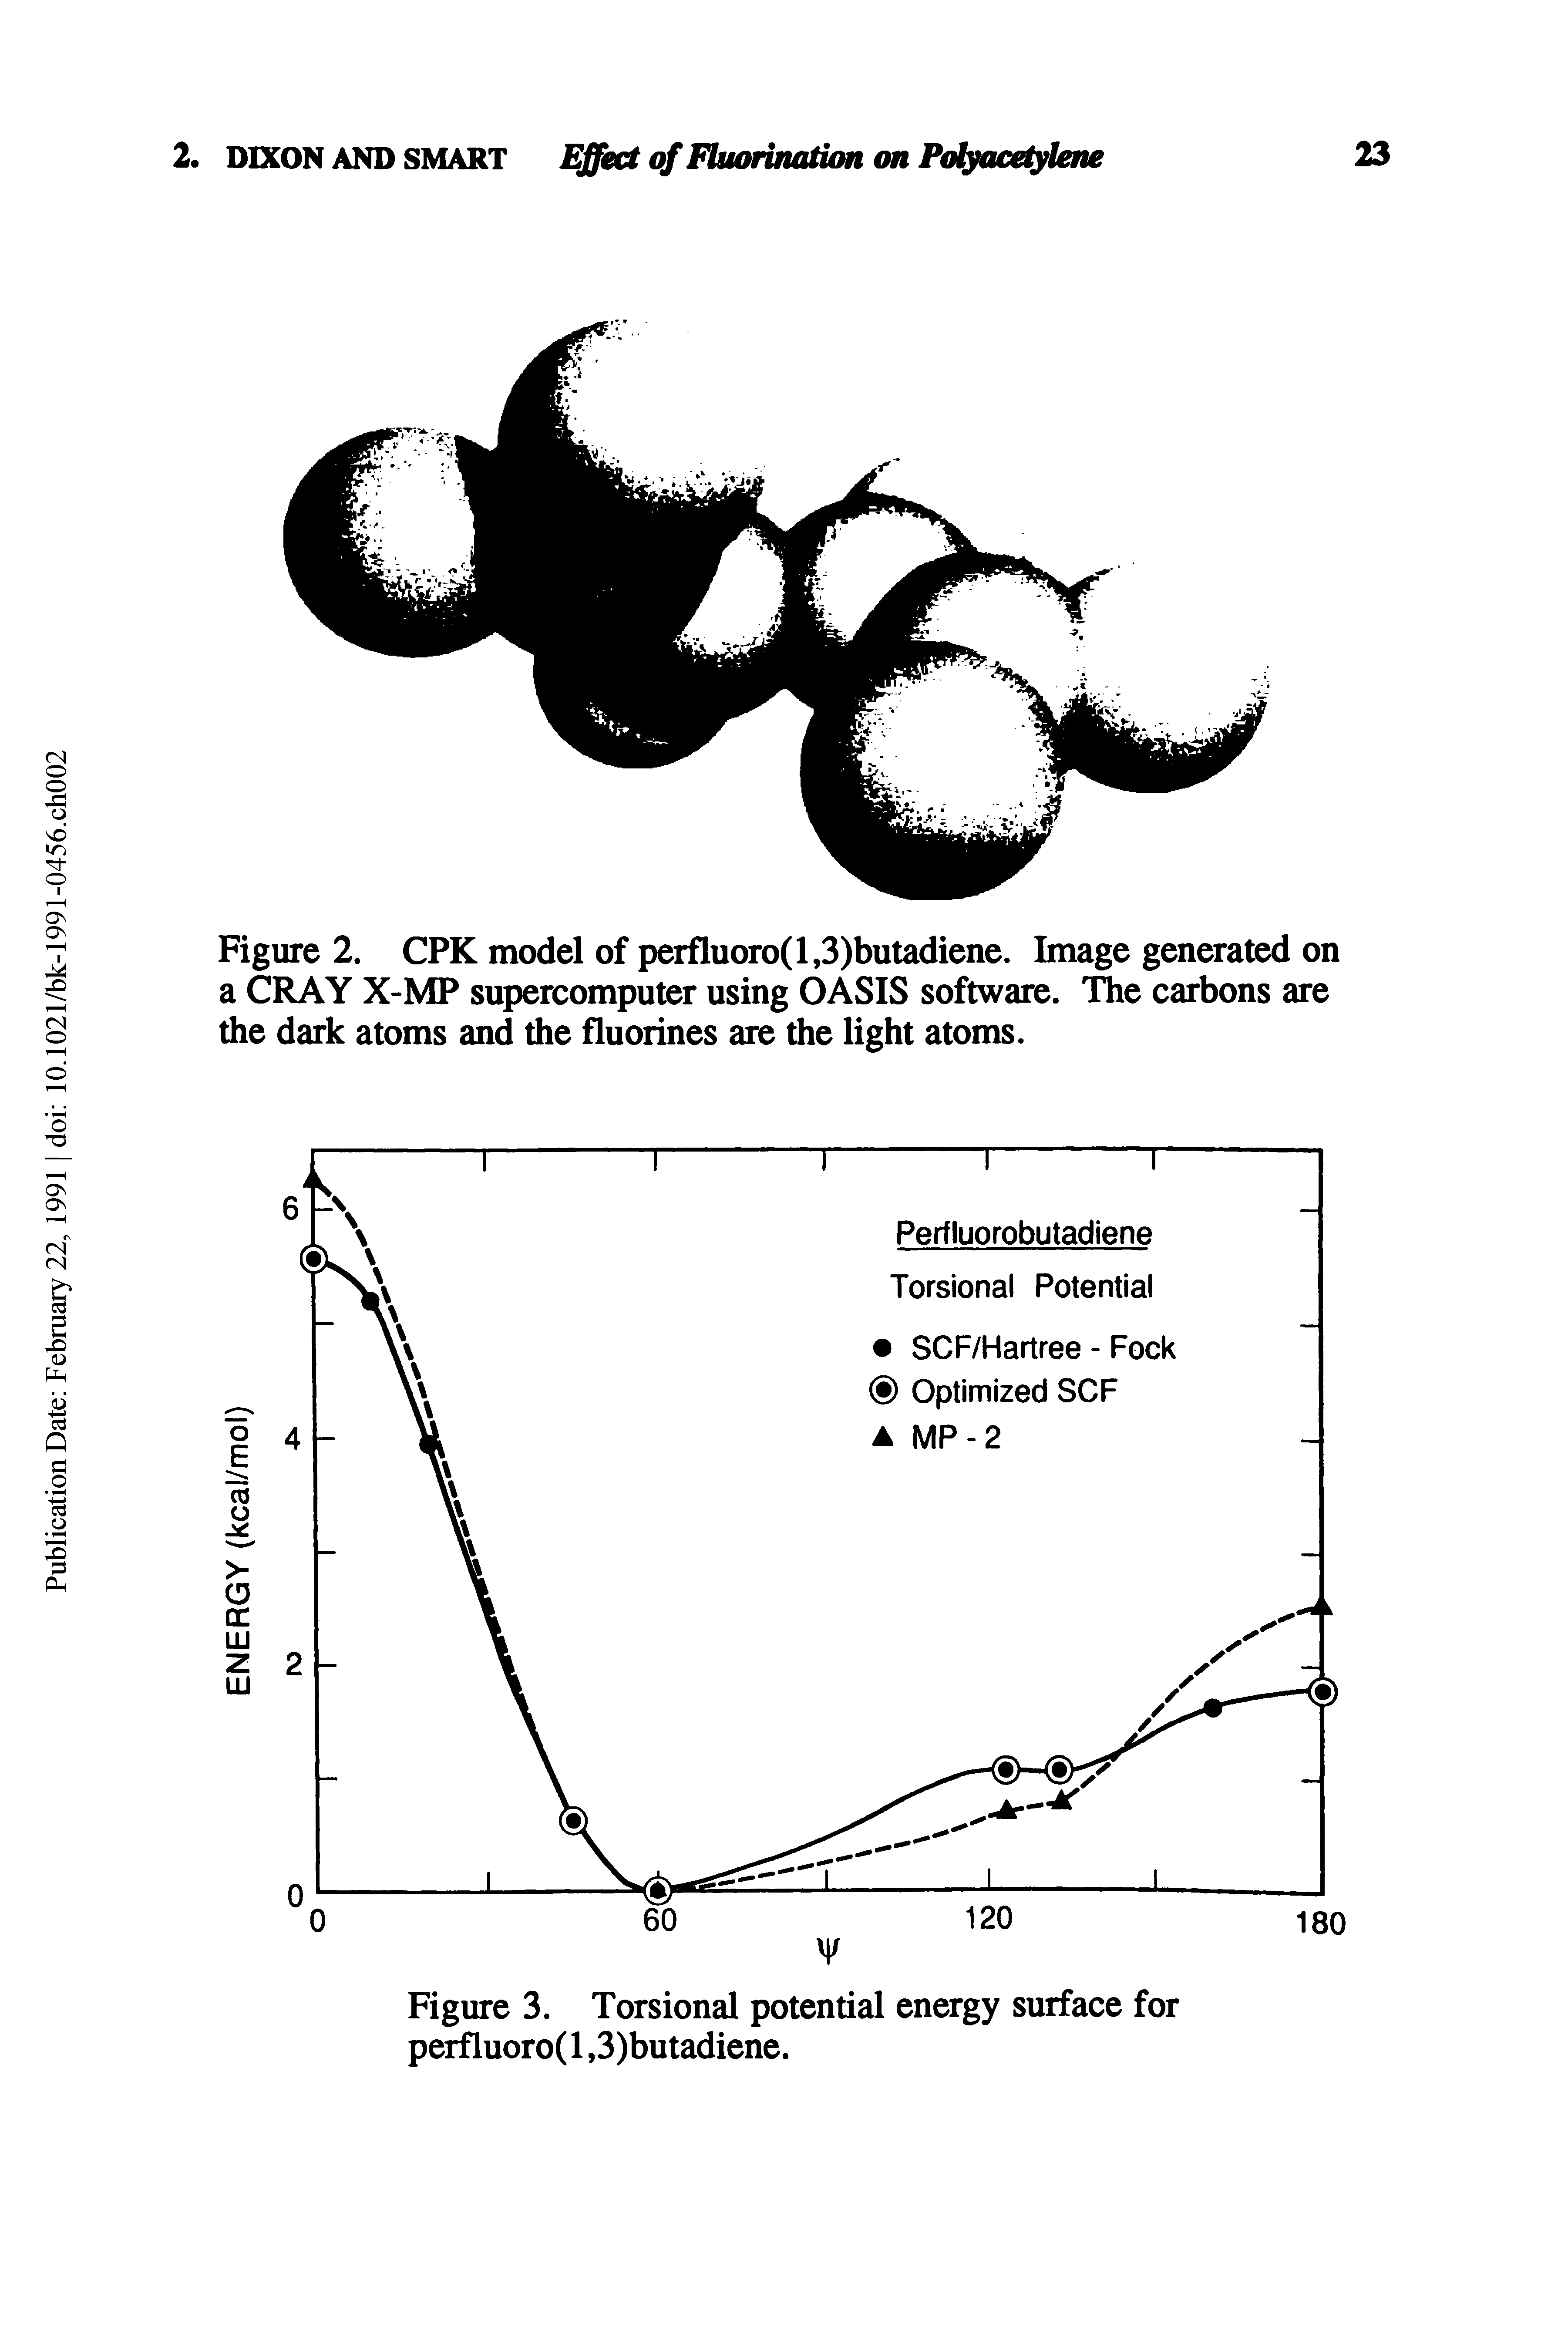 Figure 3. Torsional potential energy surface for perfluoro(l, 3)butadiene.